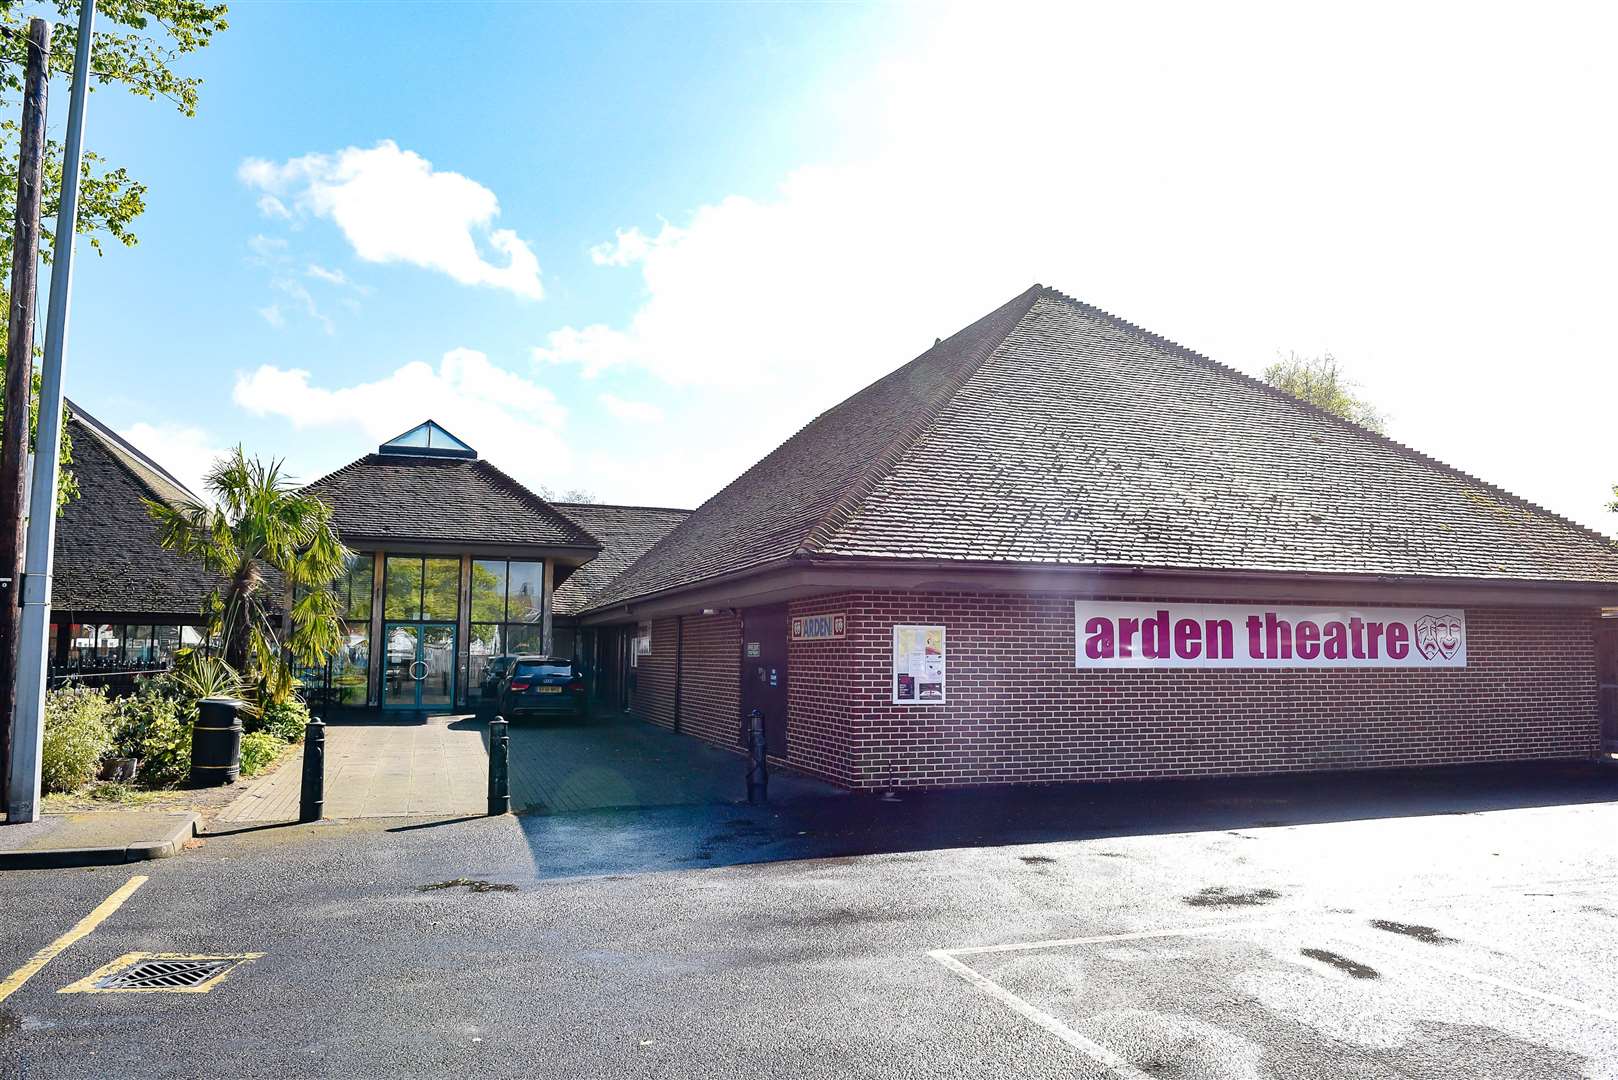 The project lined up for the Arden Theatre in Faversham is expected to cost £500,000